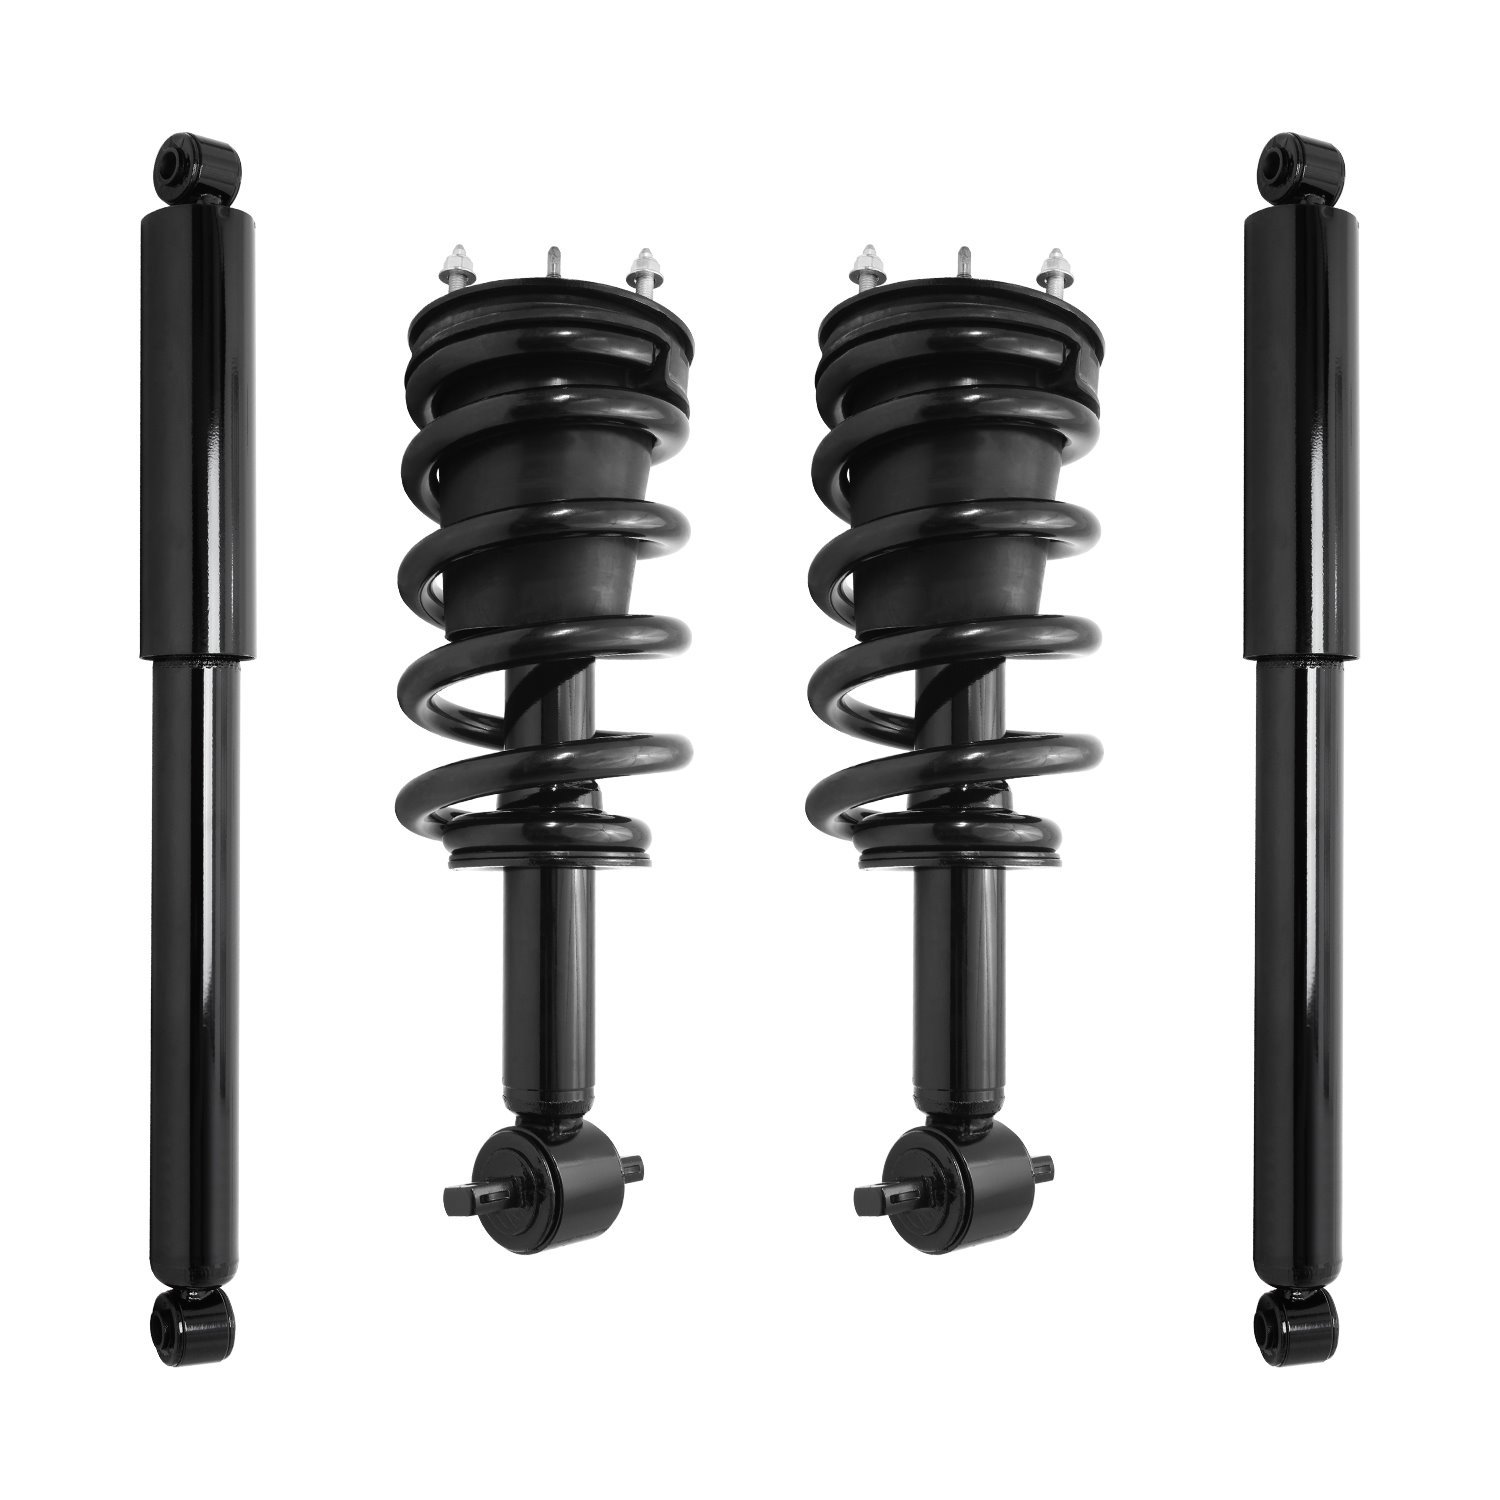 4-11650-251500-001 Front & Rear Complete Strut Assembly Shock Absorber Kit Fits Select Chevy Silverado 1500, GMC Sierra 1500